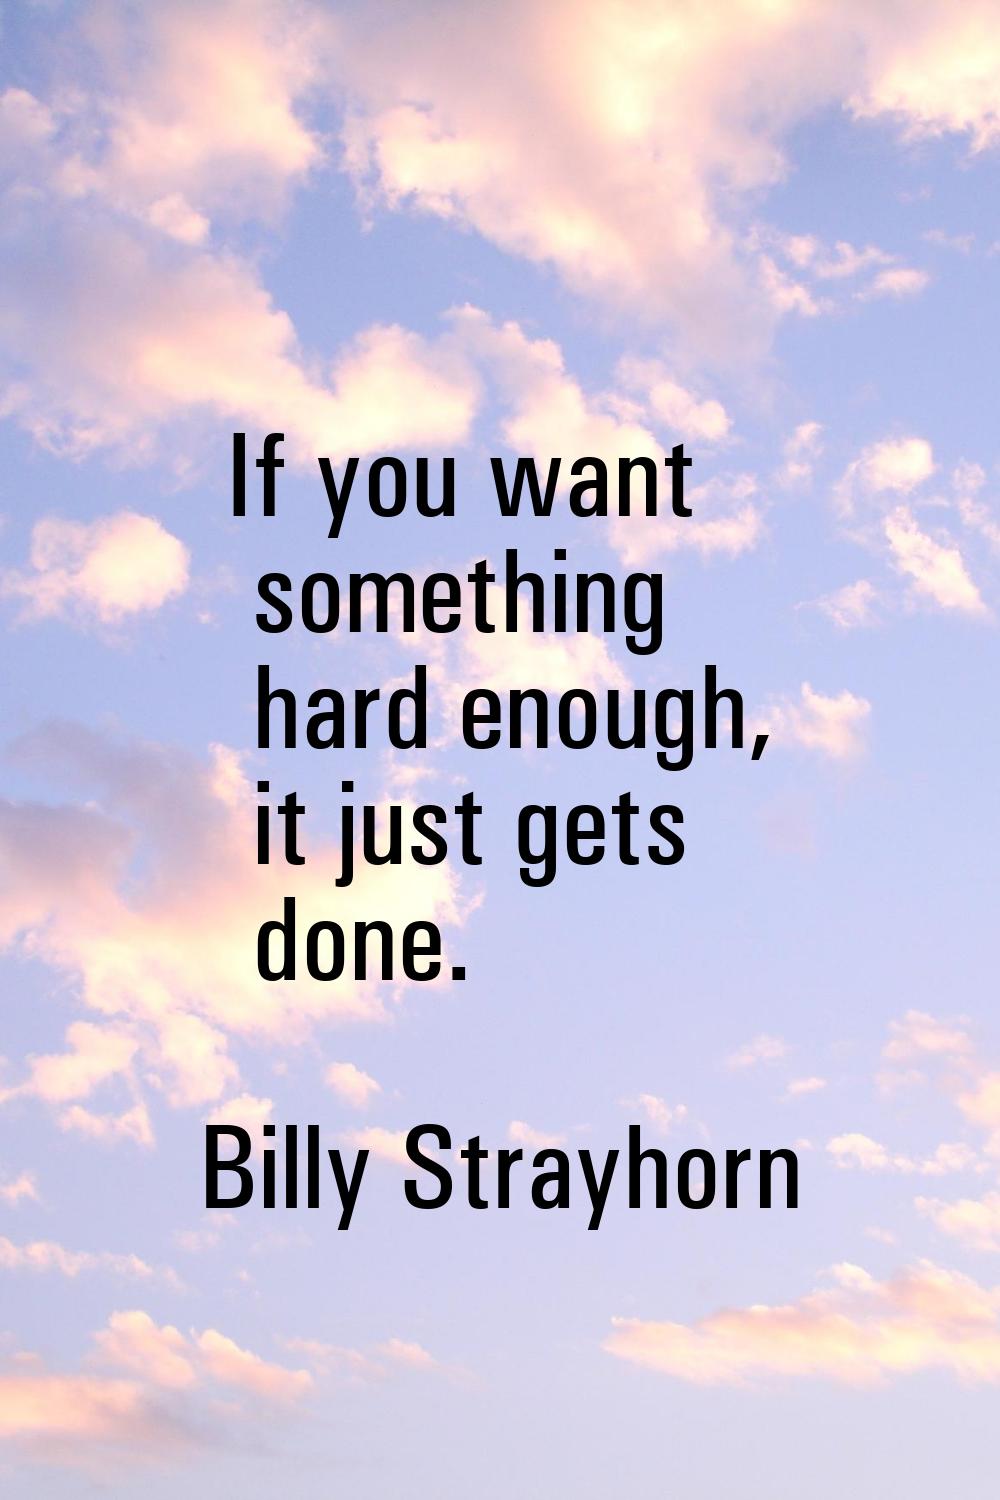 If you want something hard enough, it just gets done.